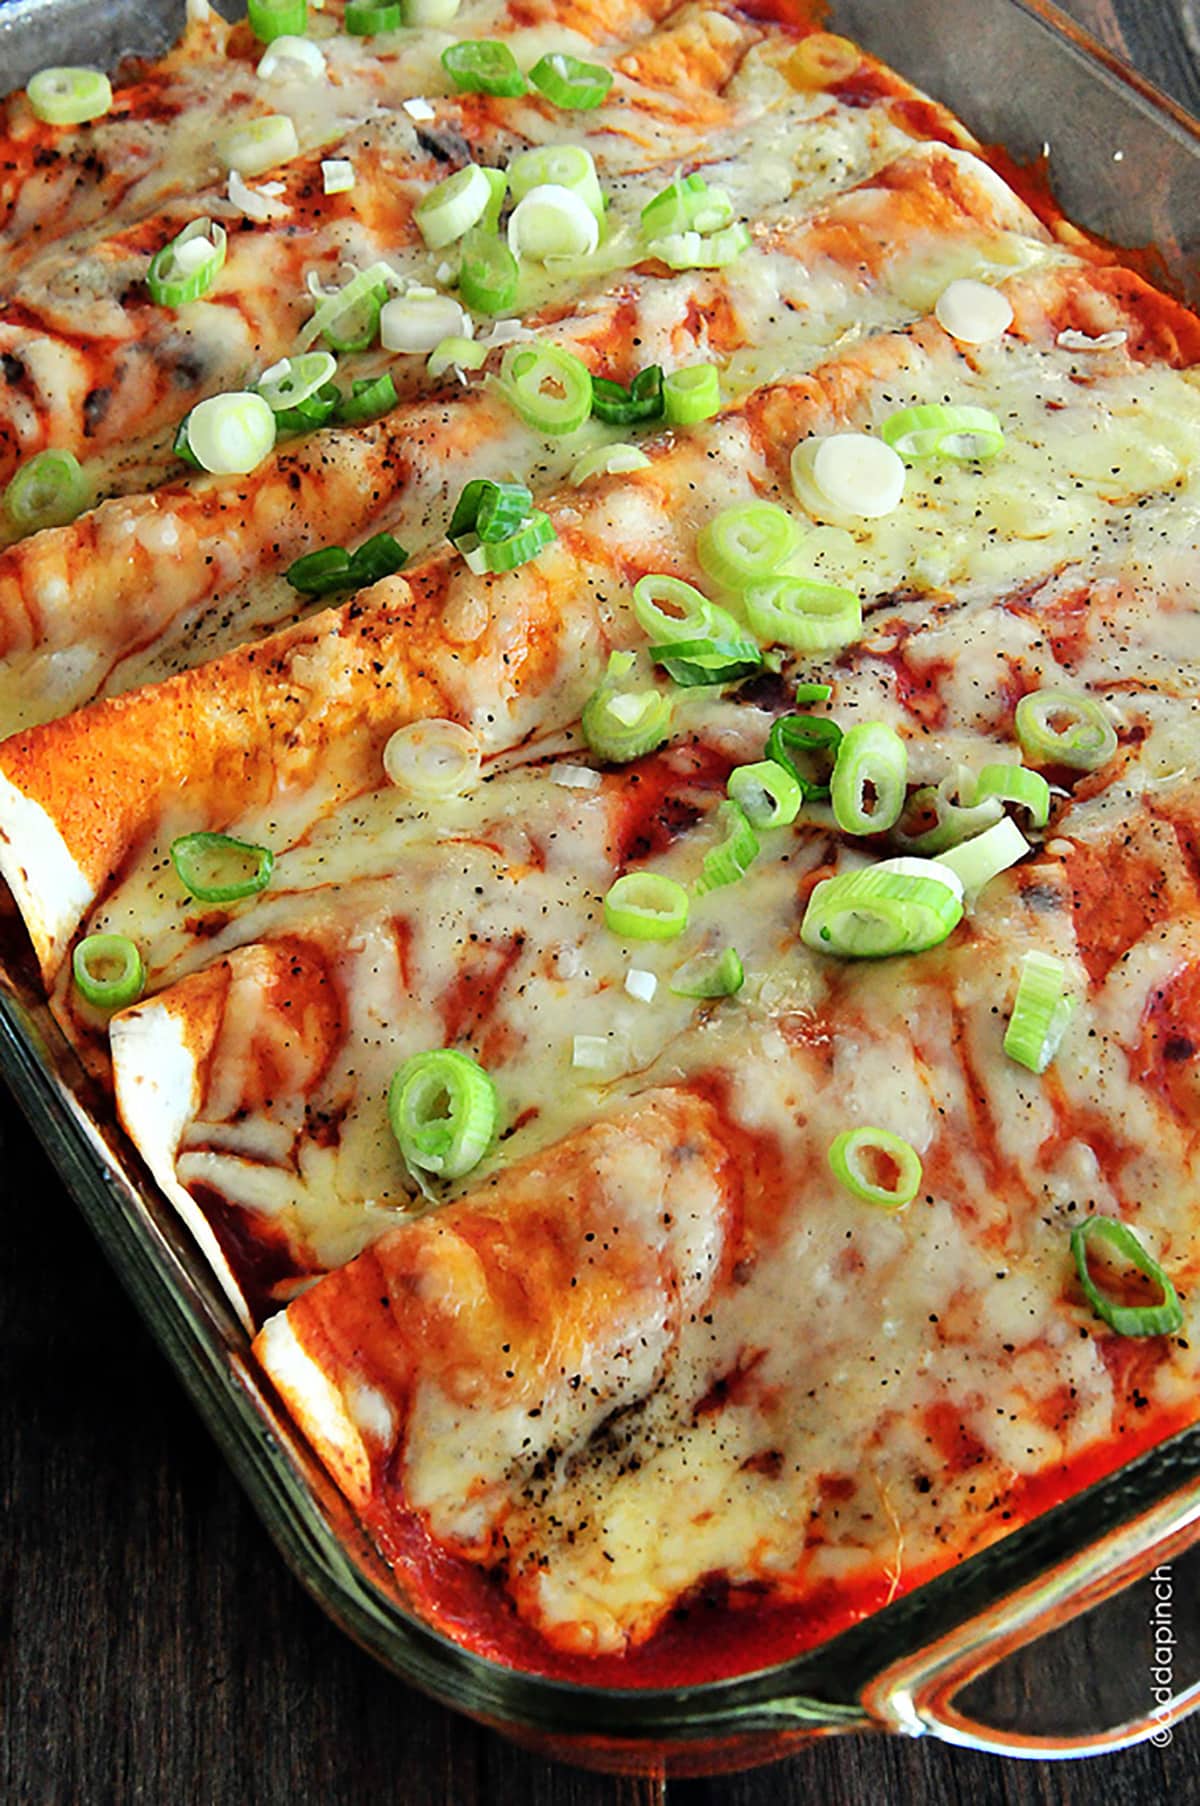 Baking dish with baked chicken enchiladas topped with green onions.